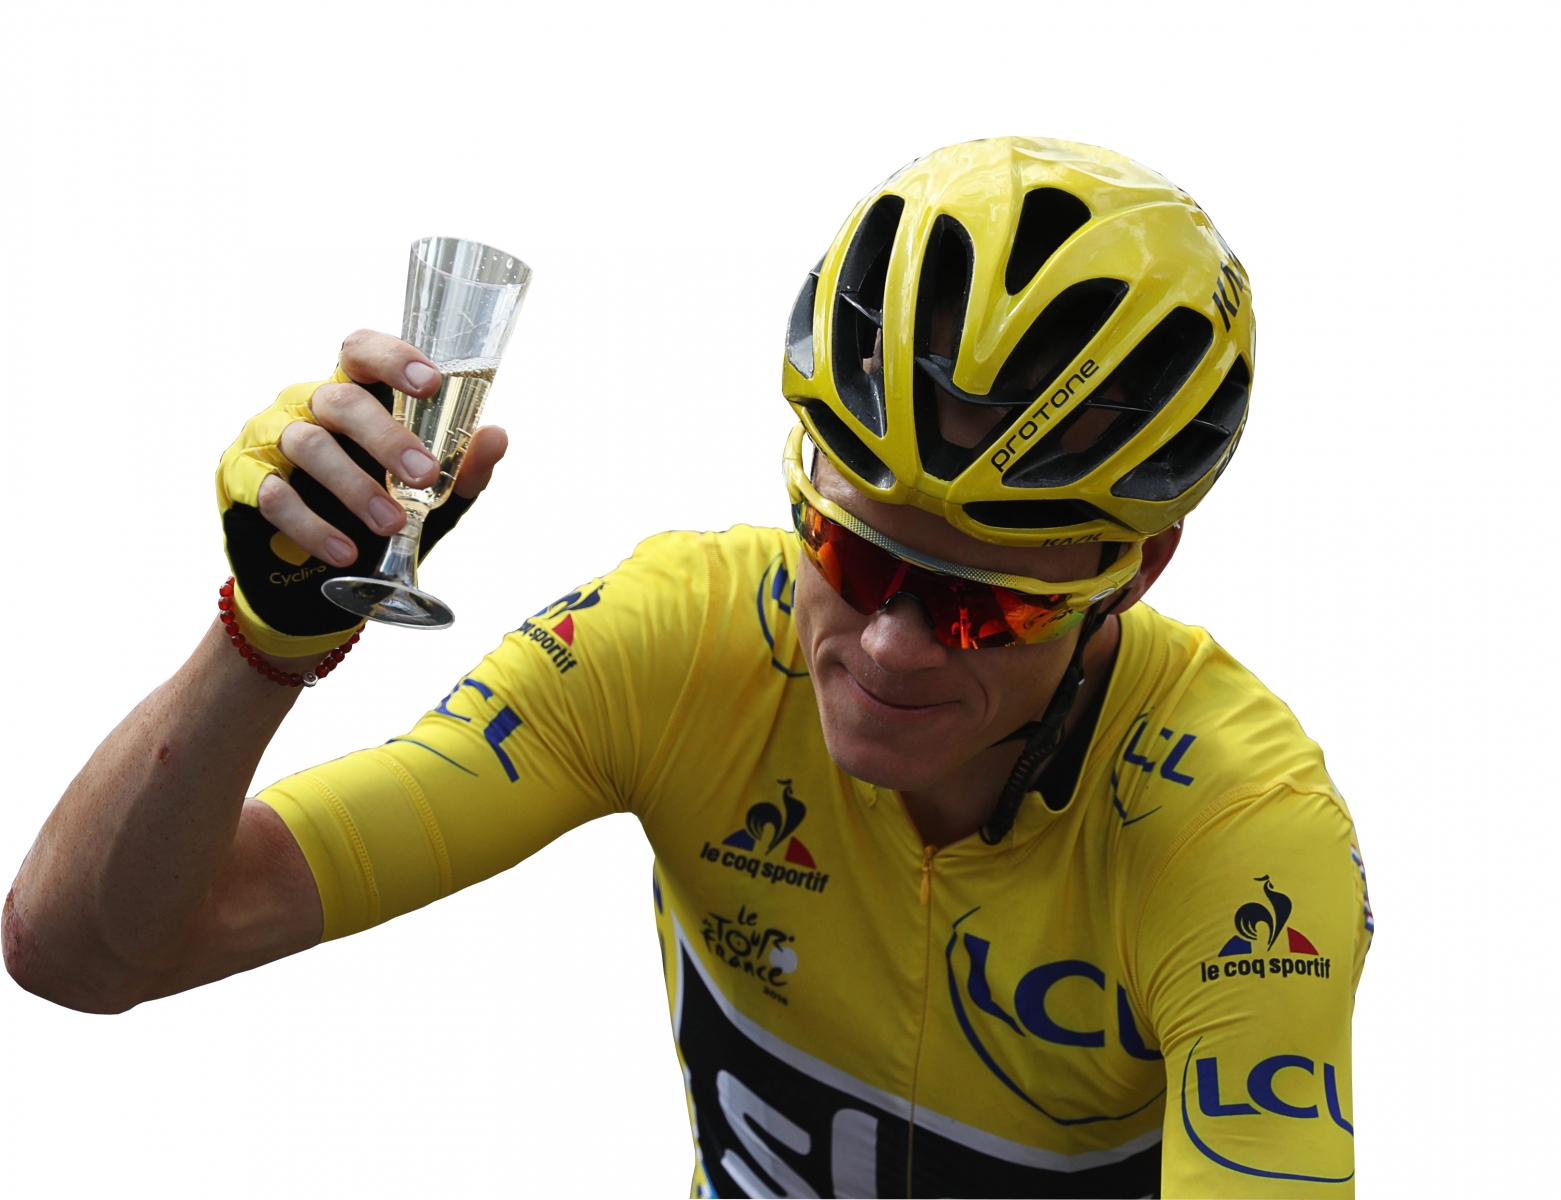 epa05439271 Team Sky rider Christopher Froome of Great Britain celebrates with a glass of Champagne during the 21st and final stage of the 103rd edition of the Tour de France cycling race over 113Km between Chantilly and Paris Champs-Elysees, France, 24 July 2016.  EPA/KENZO TRIBOUILLARD / POOL